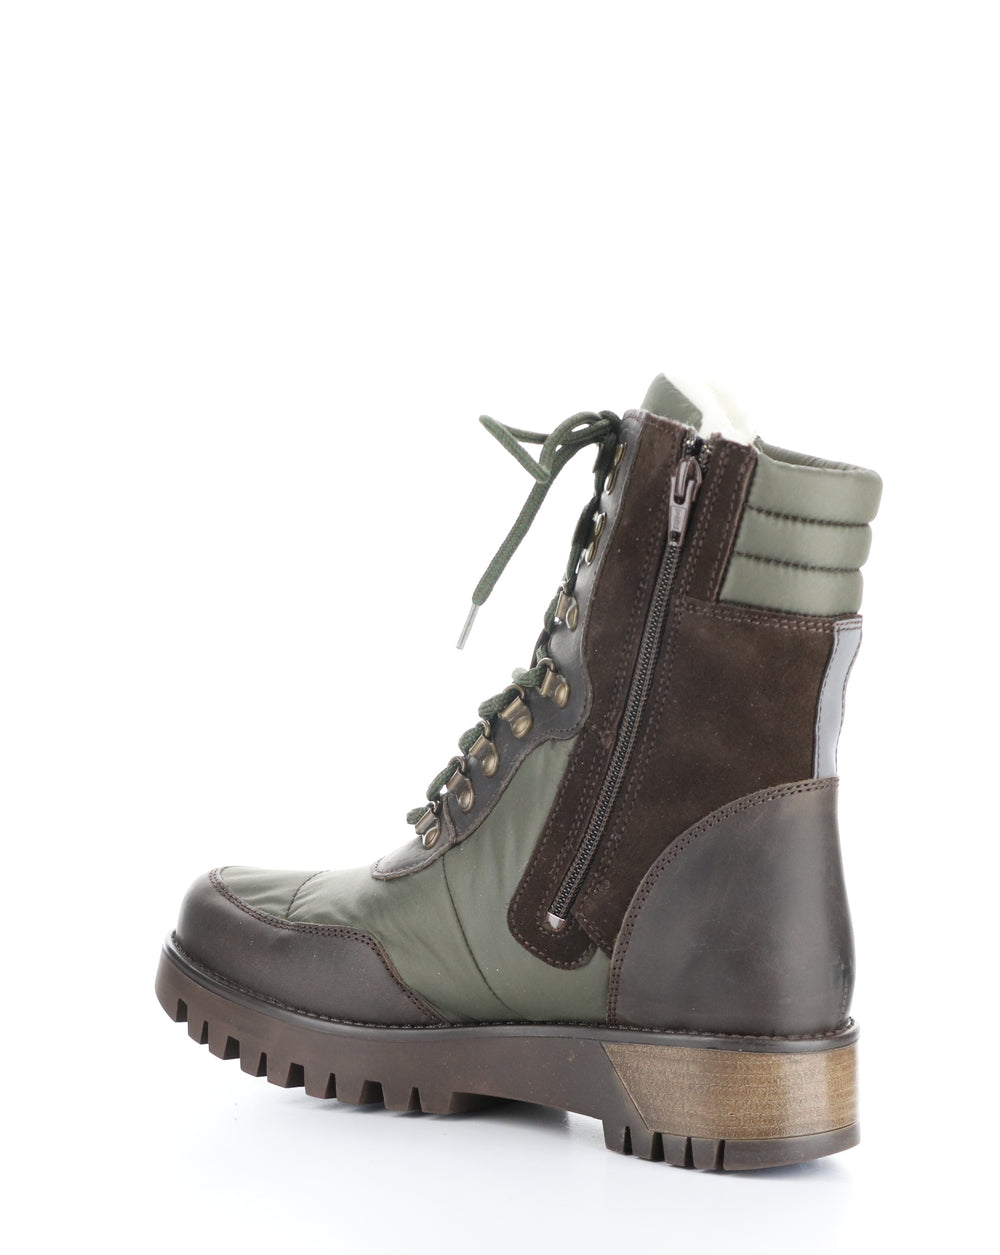 GREER PRIMA DK BROWN/OLIVE Round Toe Boots